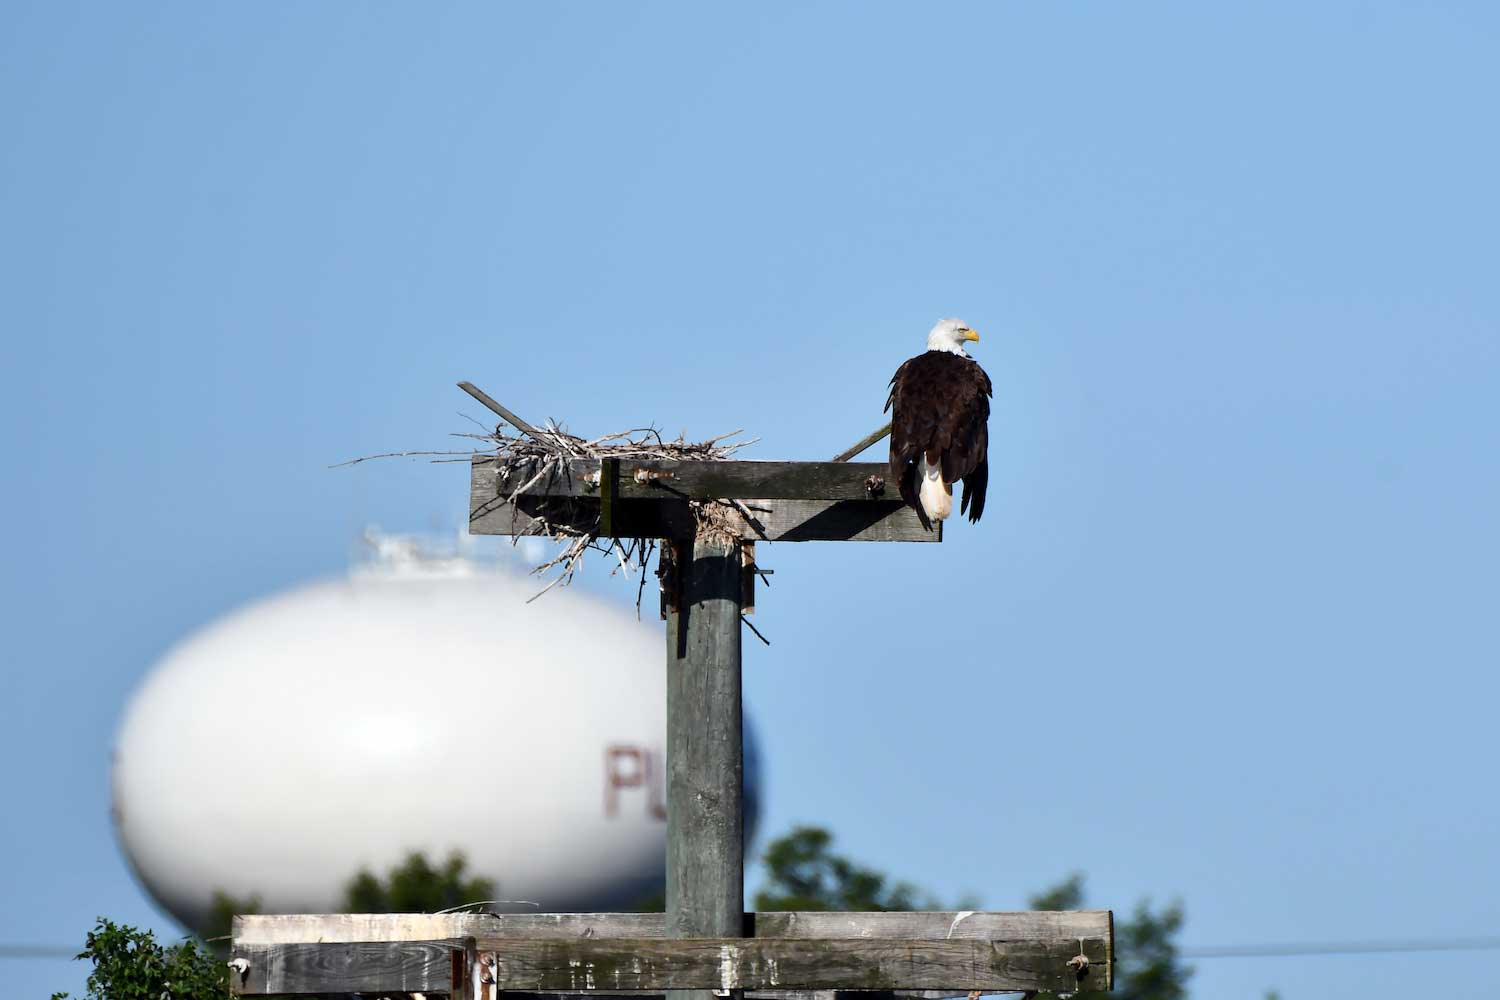 A blad eagle perched on a nesting platform with a water tower in the background.